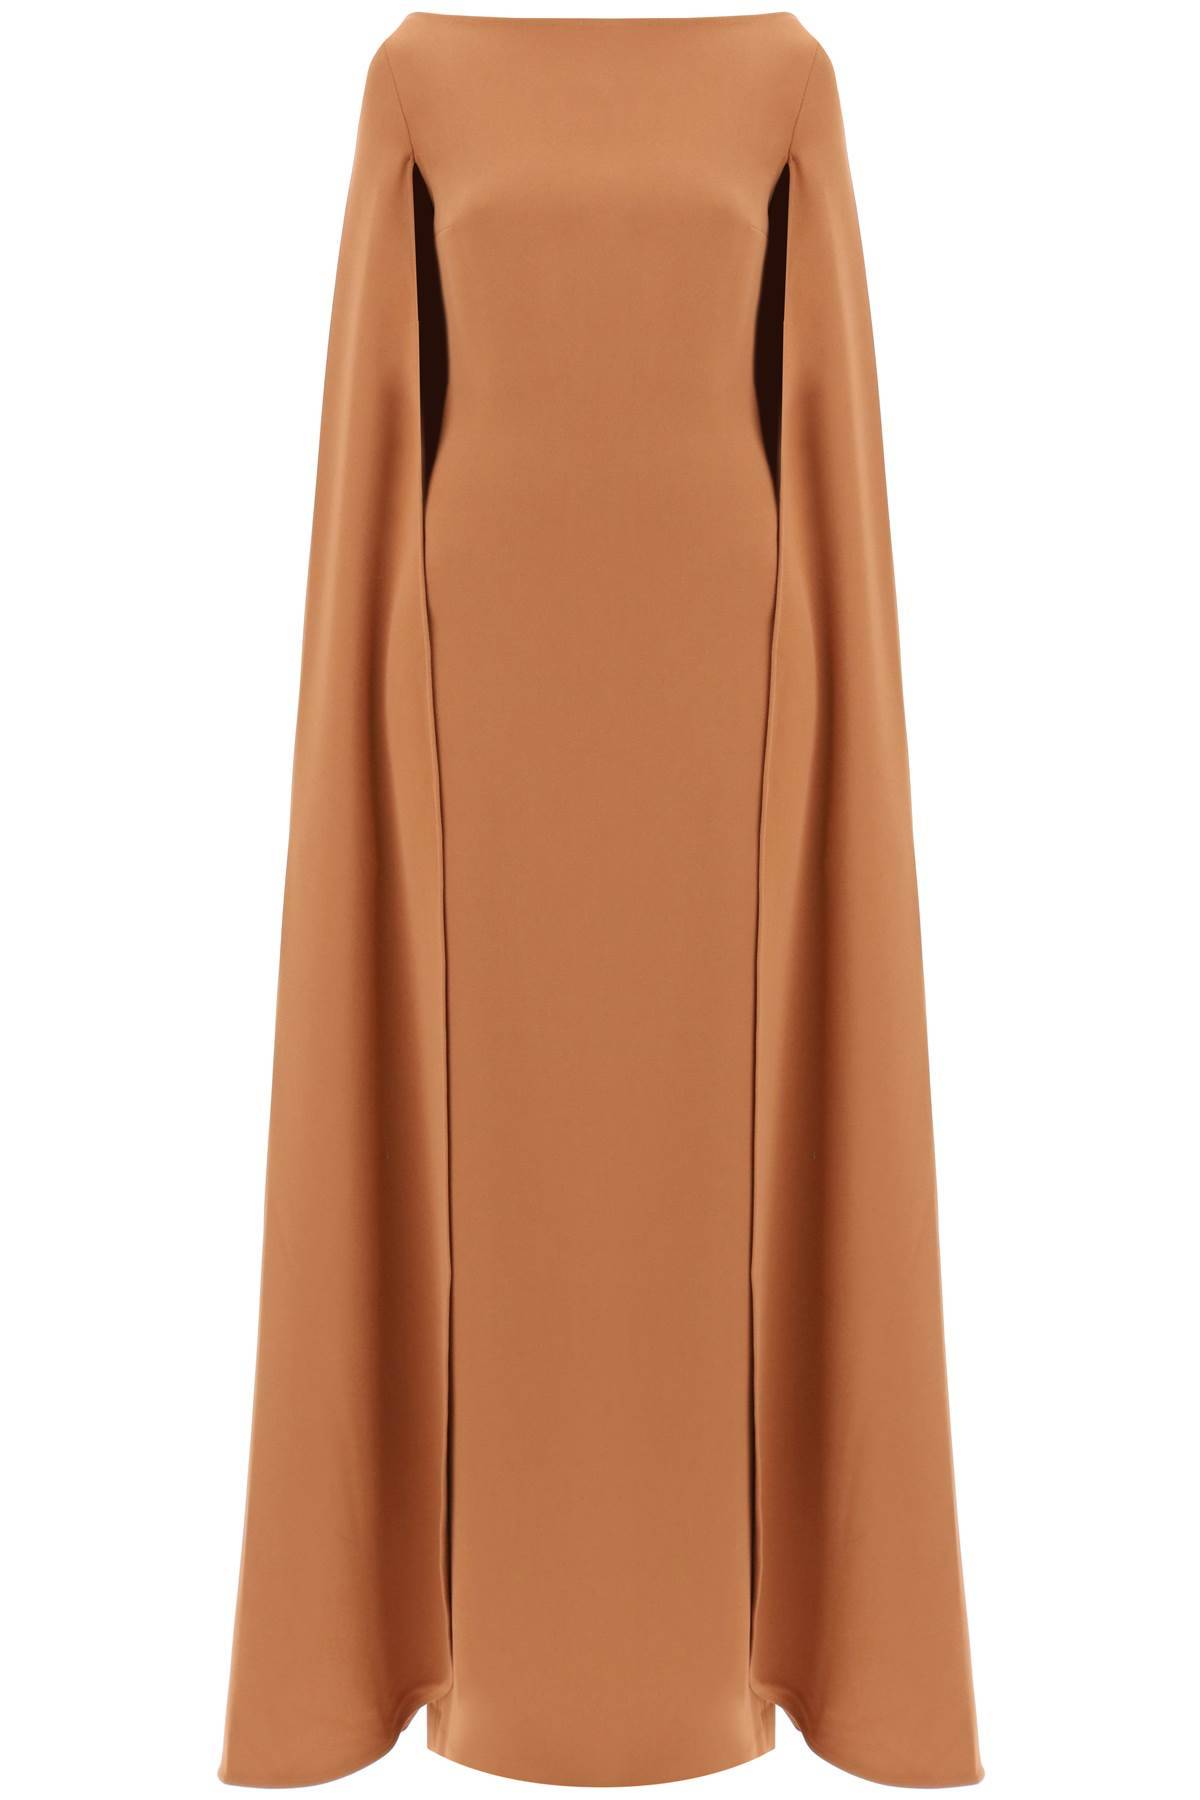 Solace London SOLACE LONDON maxi dress sadie with cape sleeves